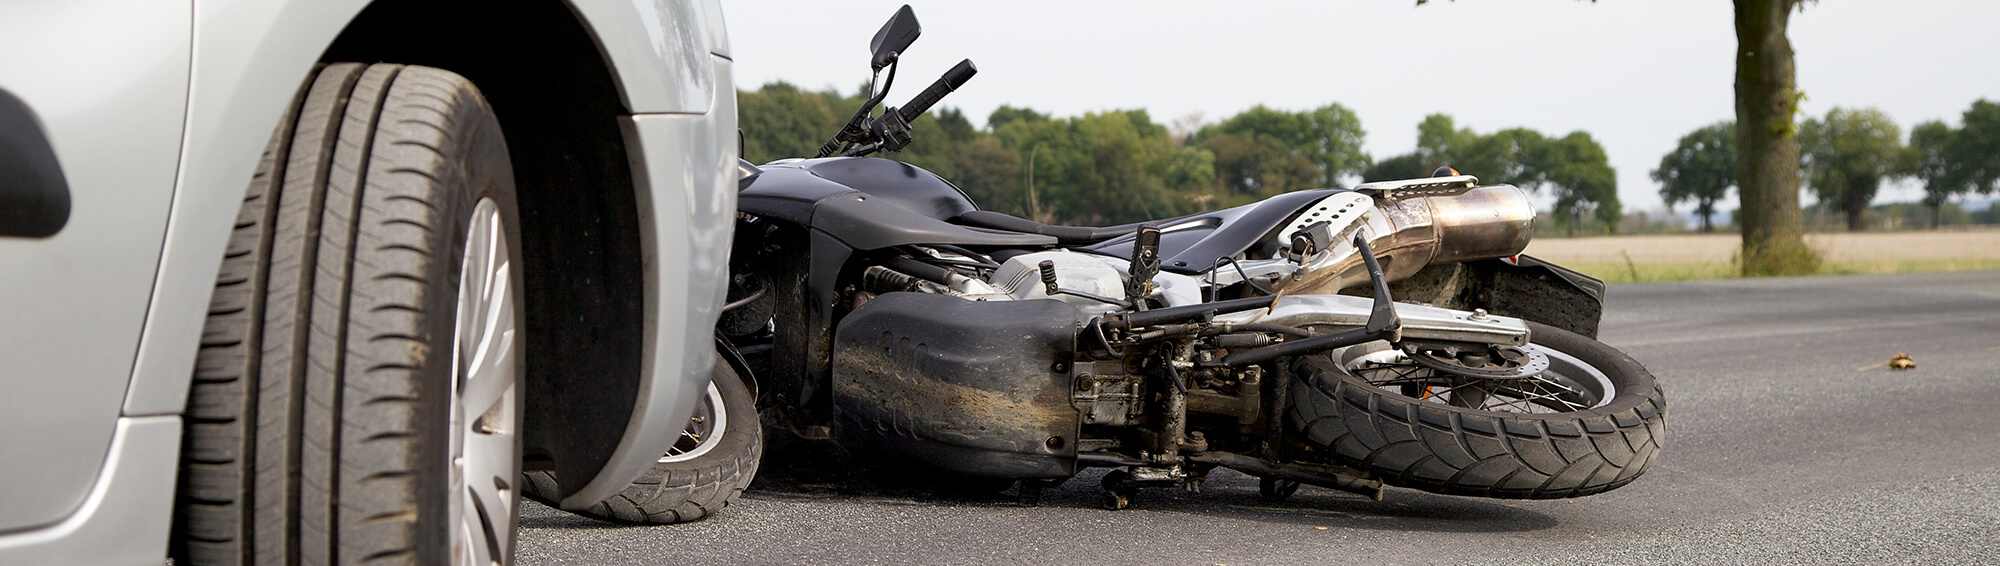 Common Injuries Associated with Motorcycle Accidents